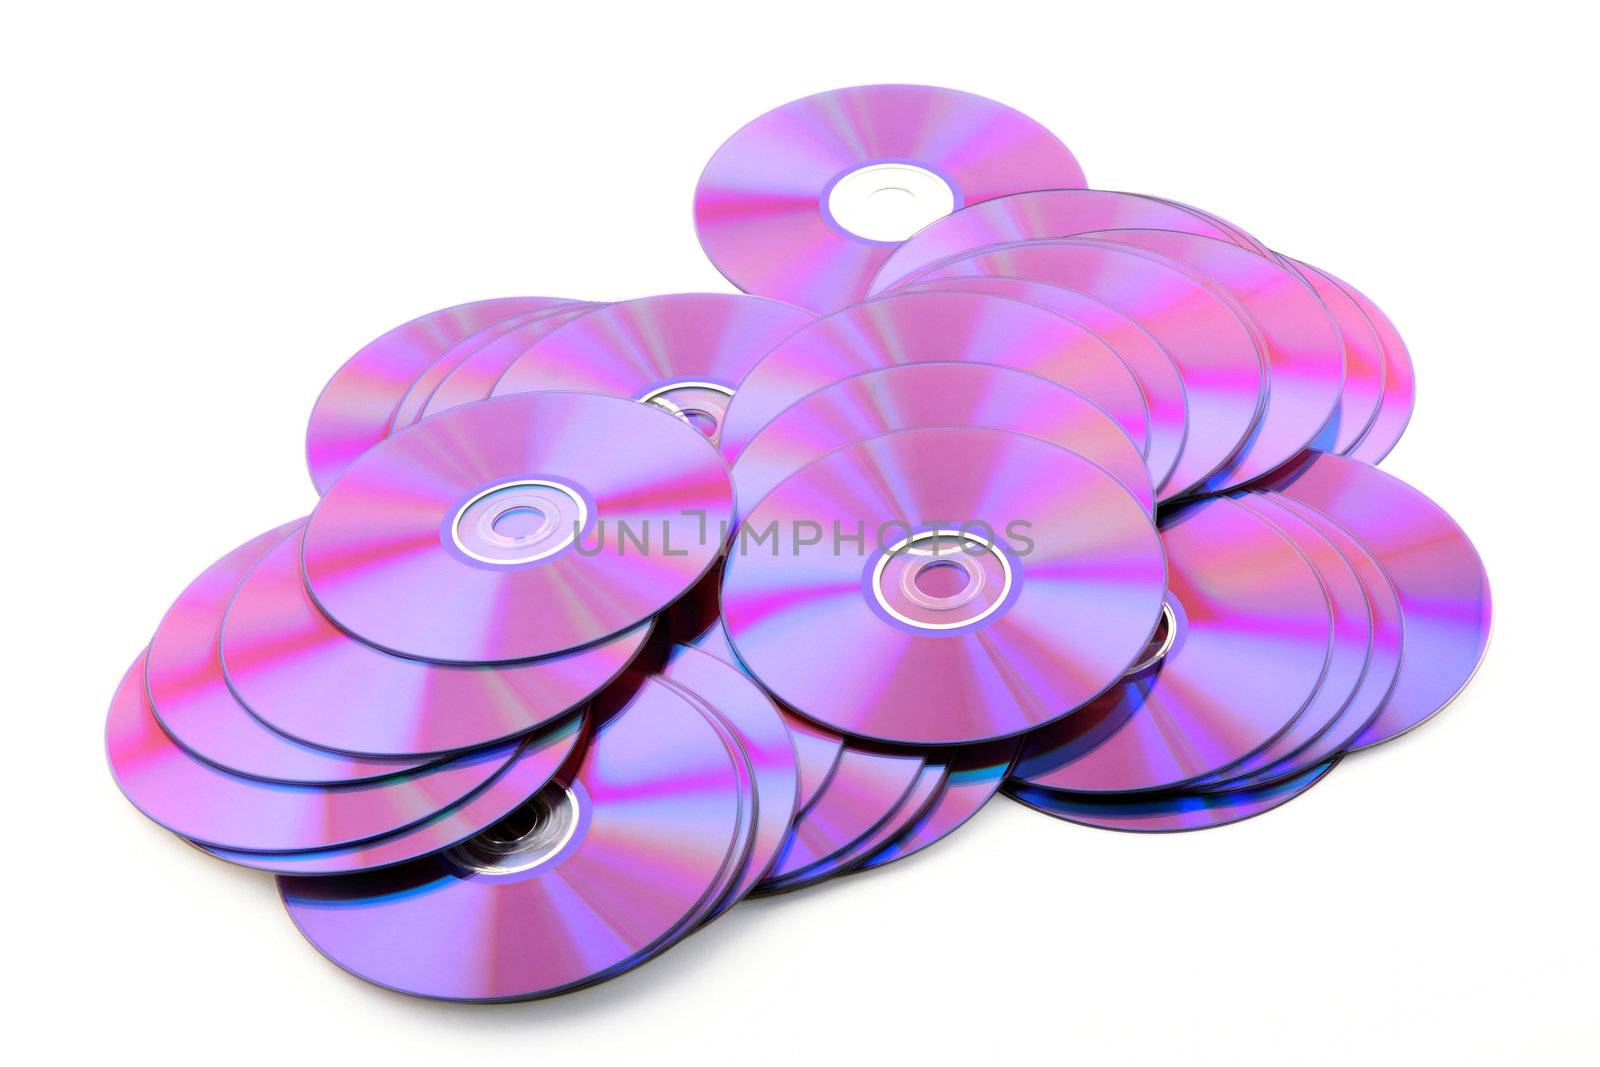 Pile of colorful purple DVDs or CDs on white background. No dust.